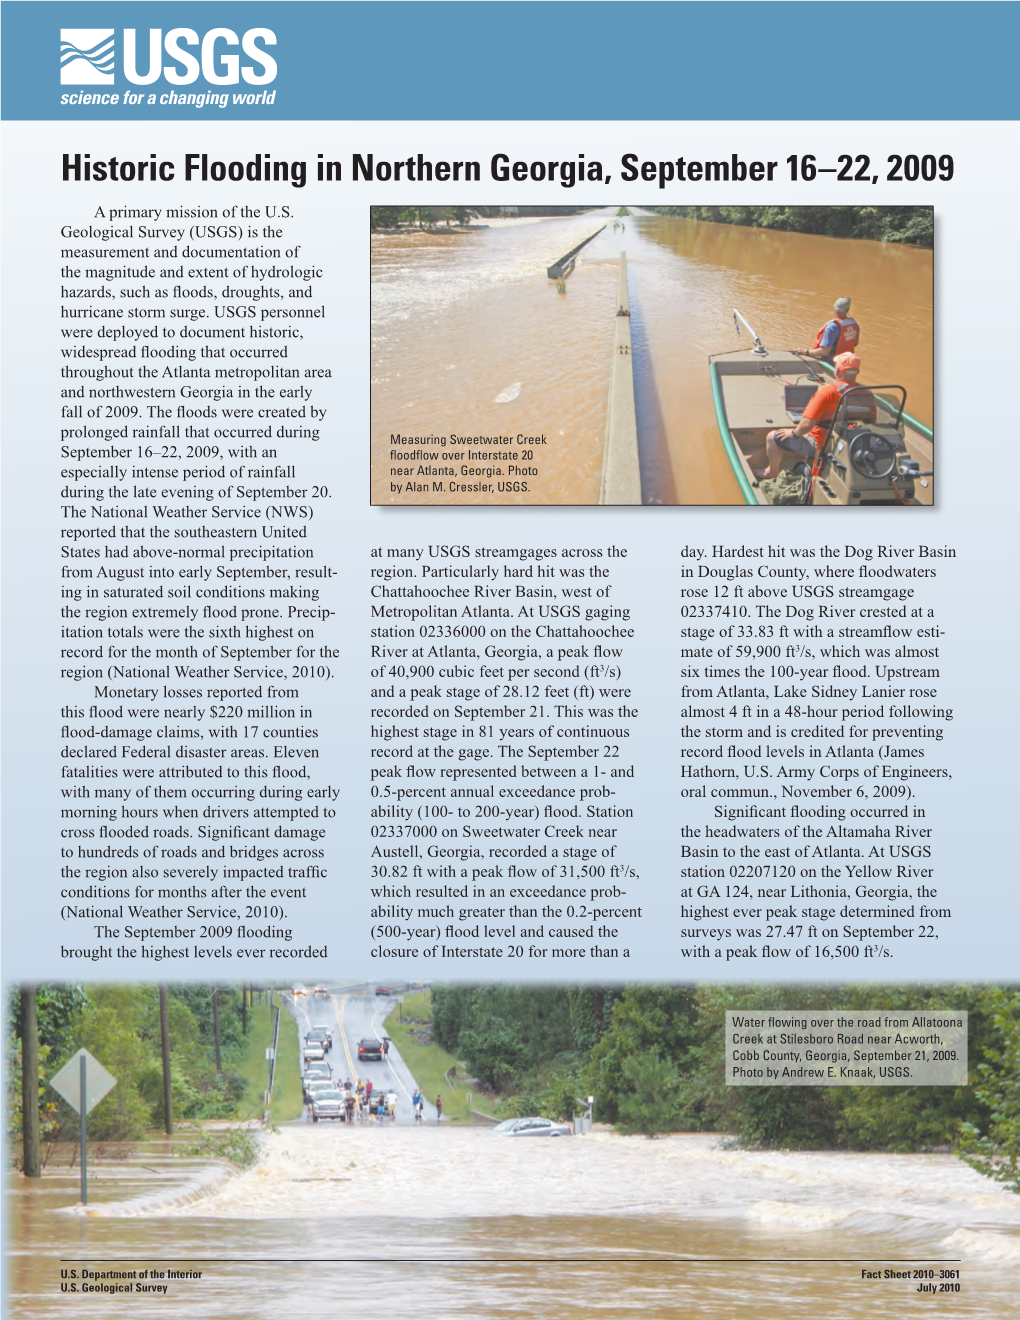 Historic Flooding in Northern Georgia, September 16–22, 2009 a Primary Mission of the U.S